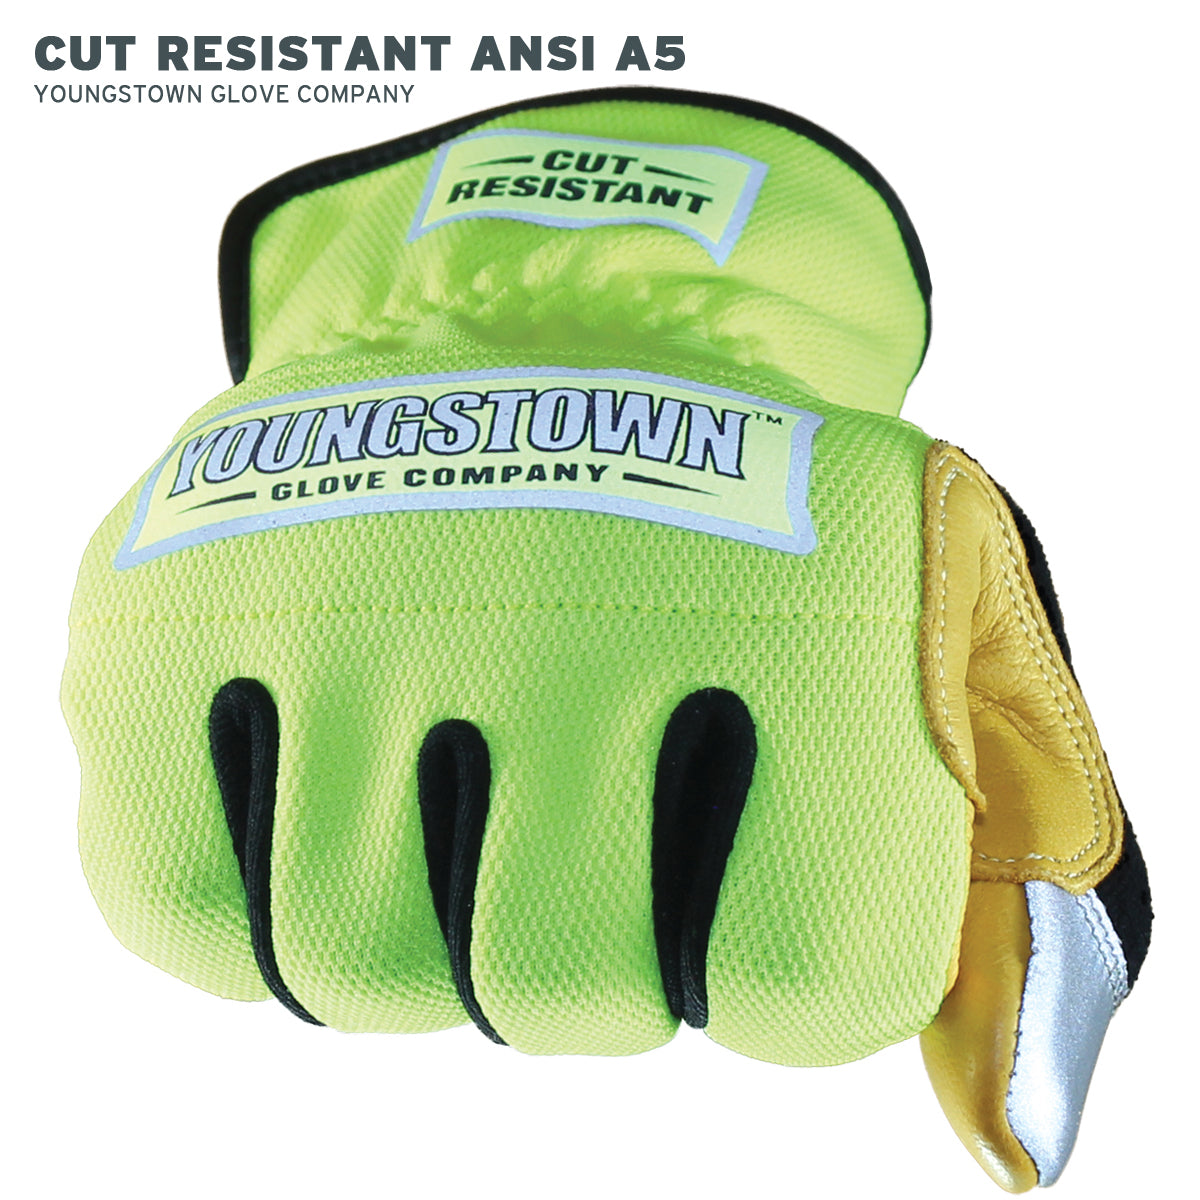 Cut Resistant Safety Lime Hybrid - Youngstown